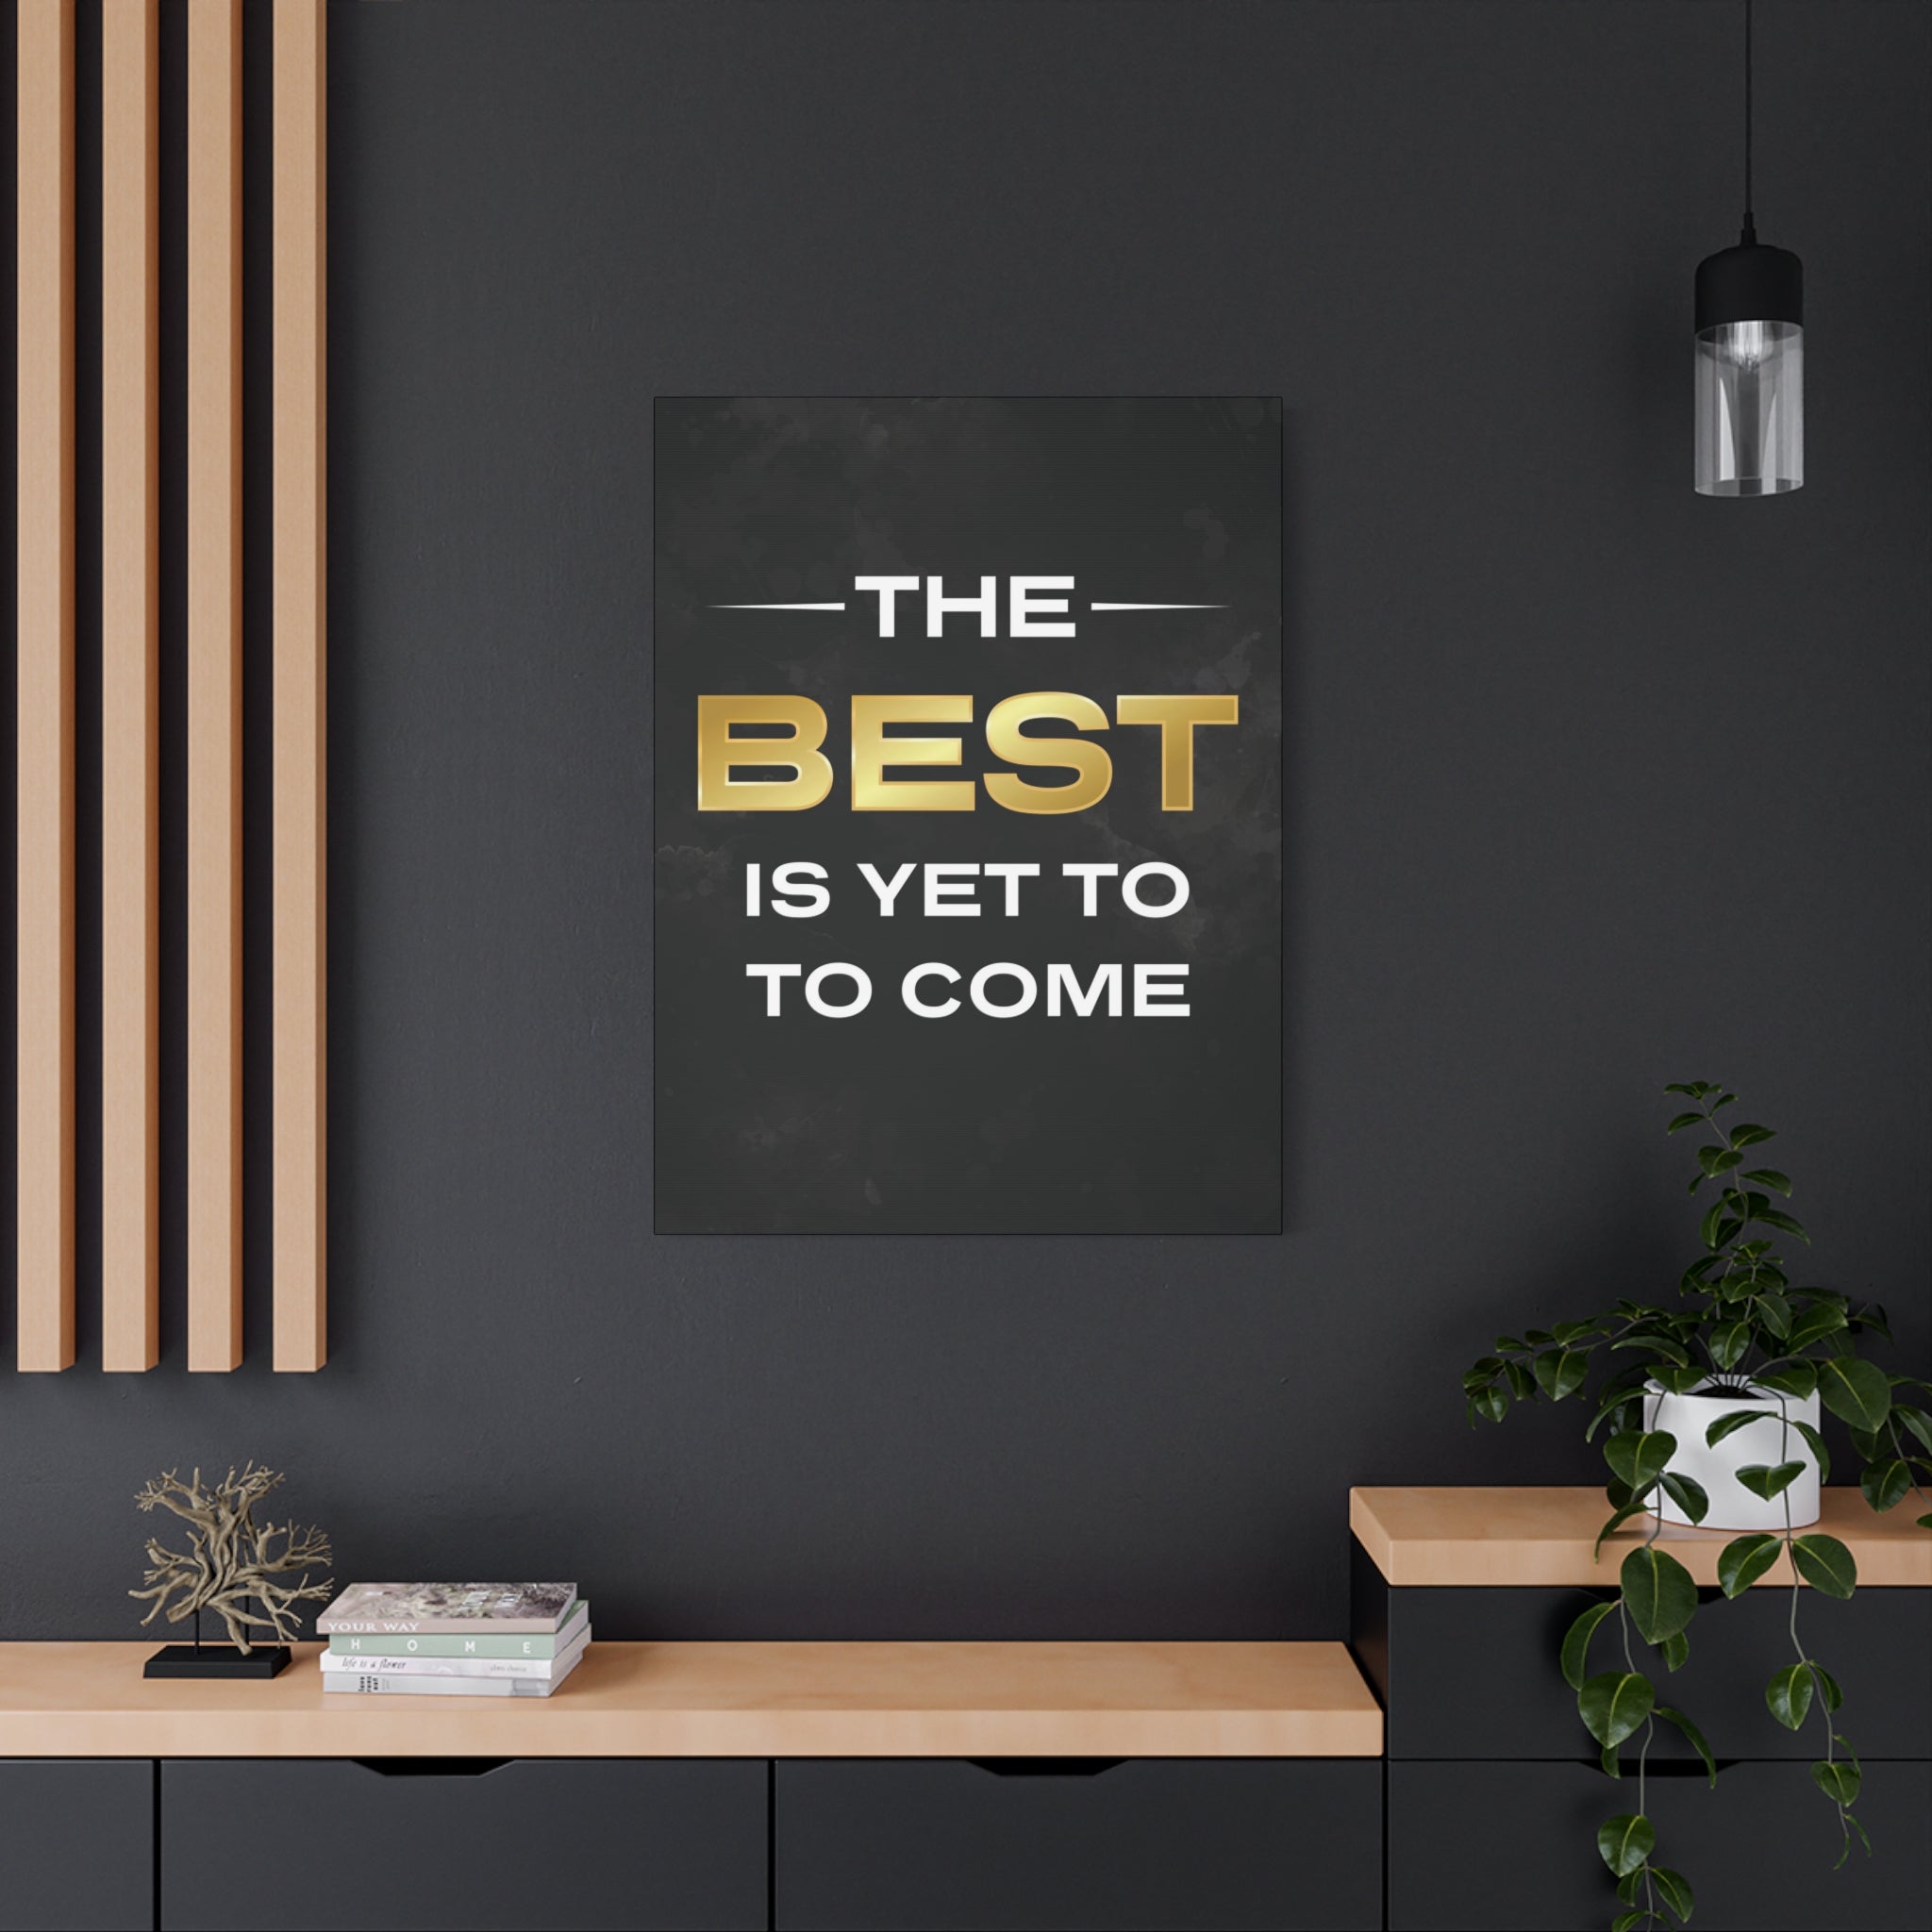 The Best Is Yet To Come Wall Art additional image 1